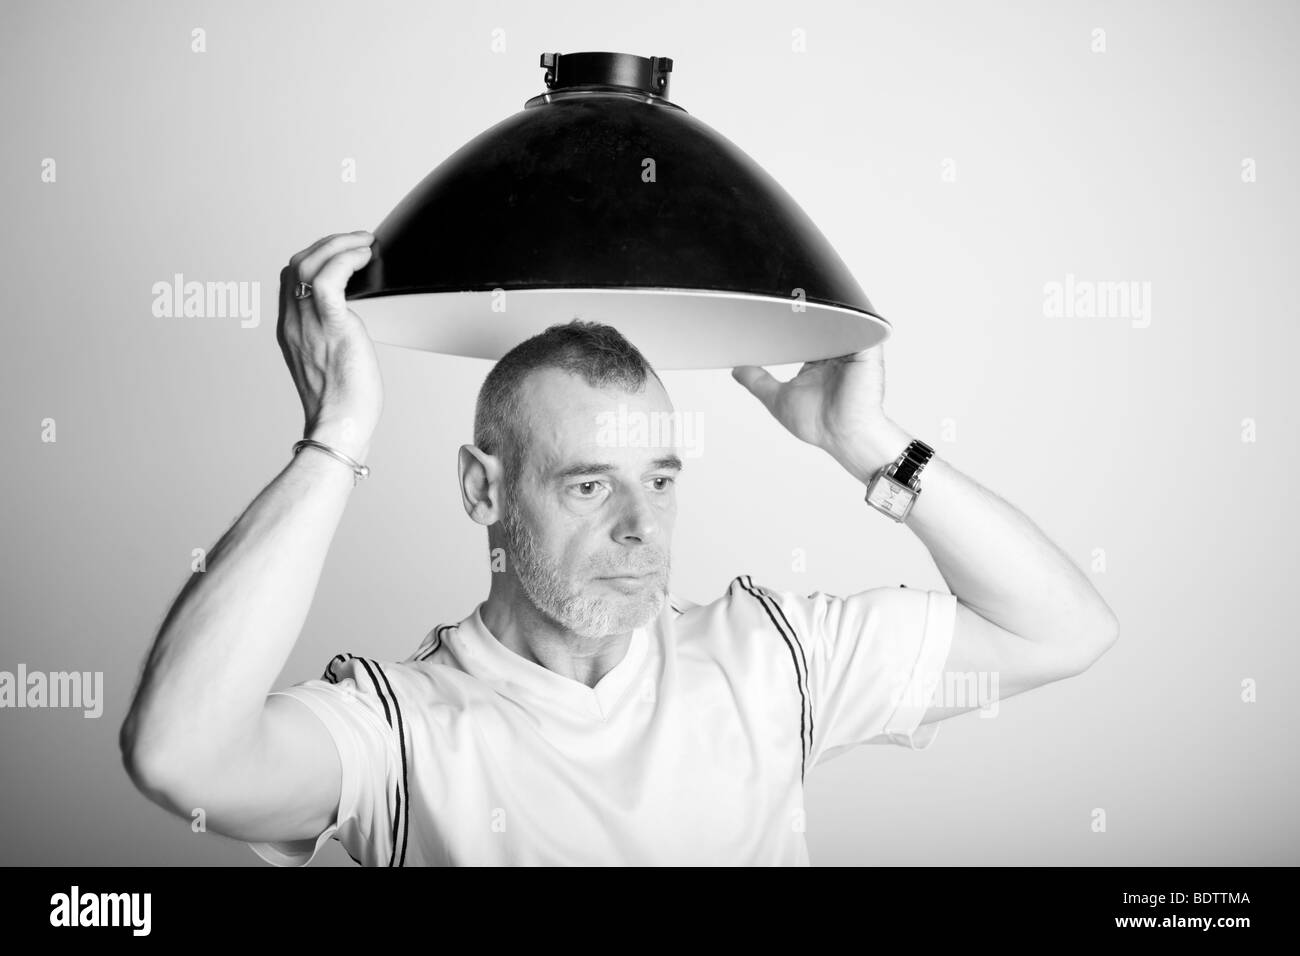 Man with a beauty dish (looks like a light shade) over his head. Stock Photo